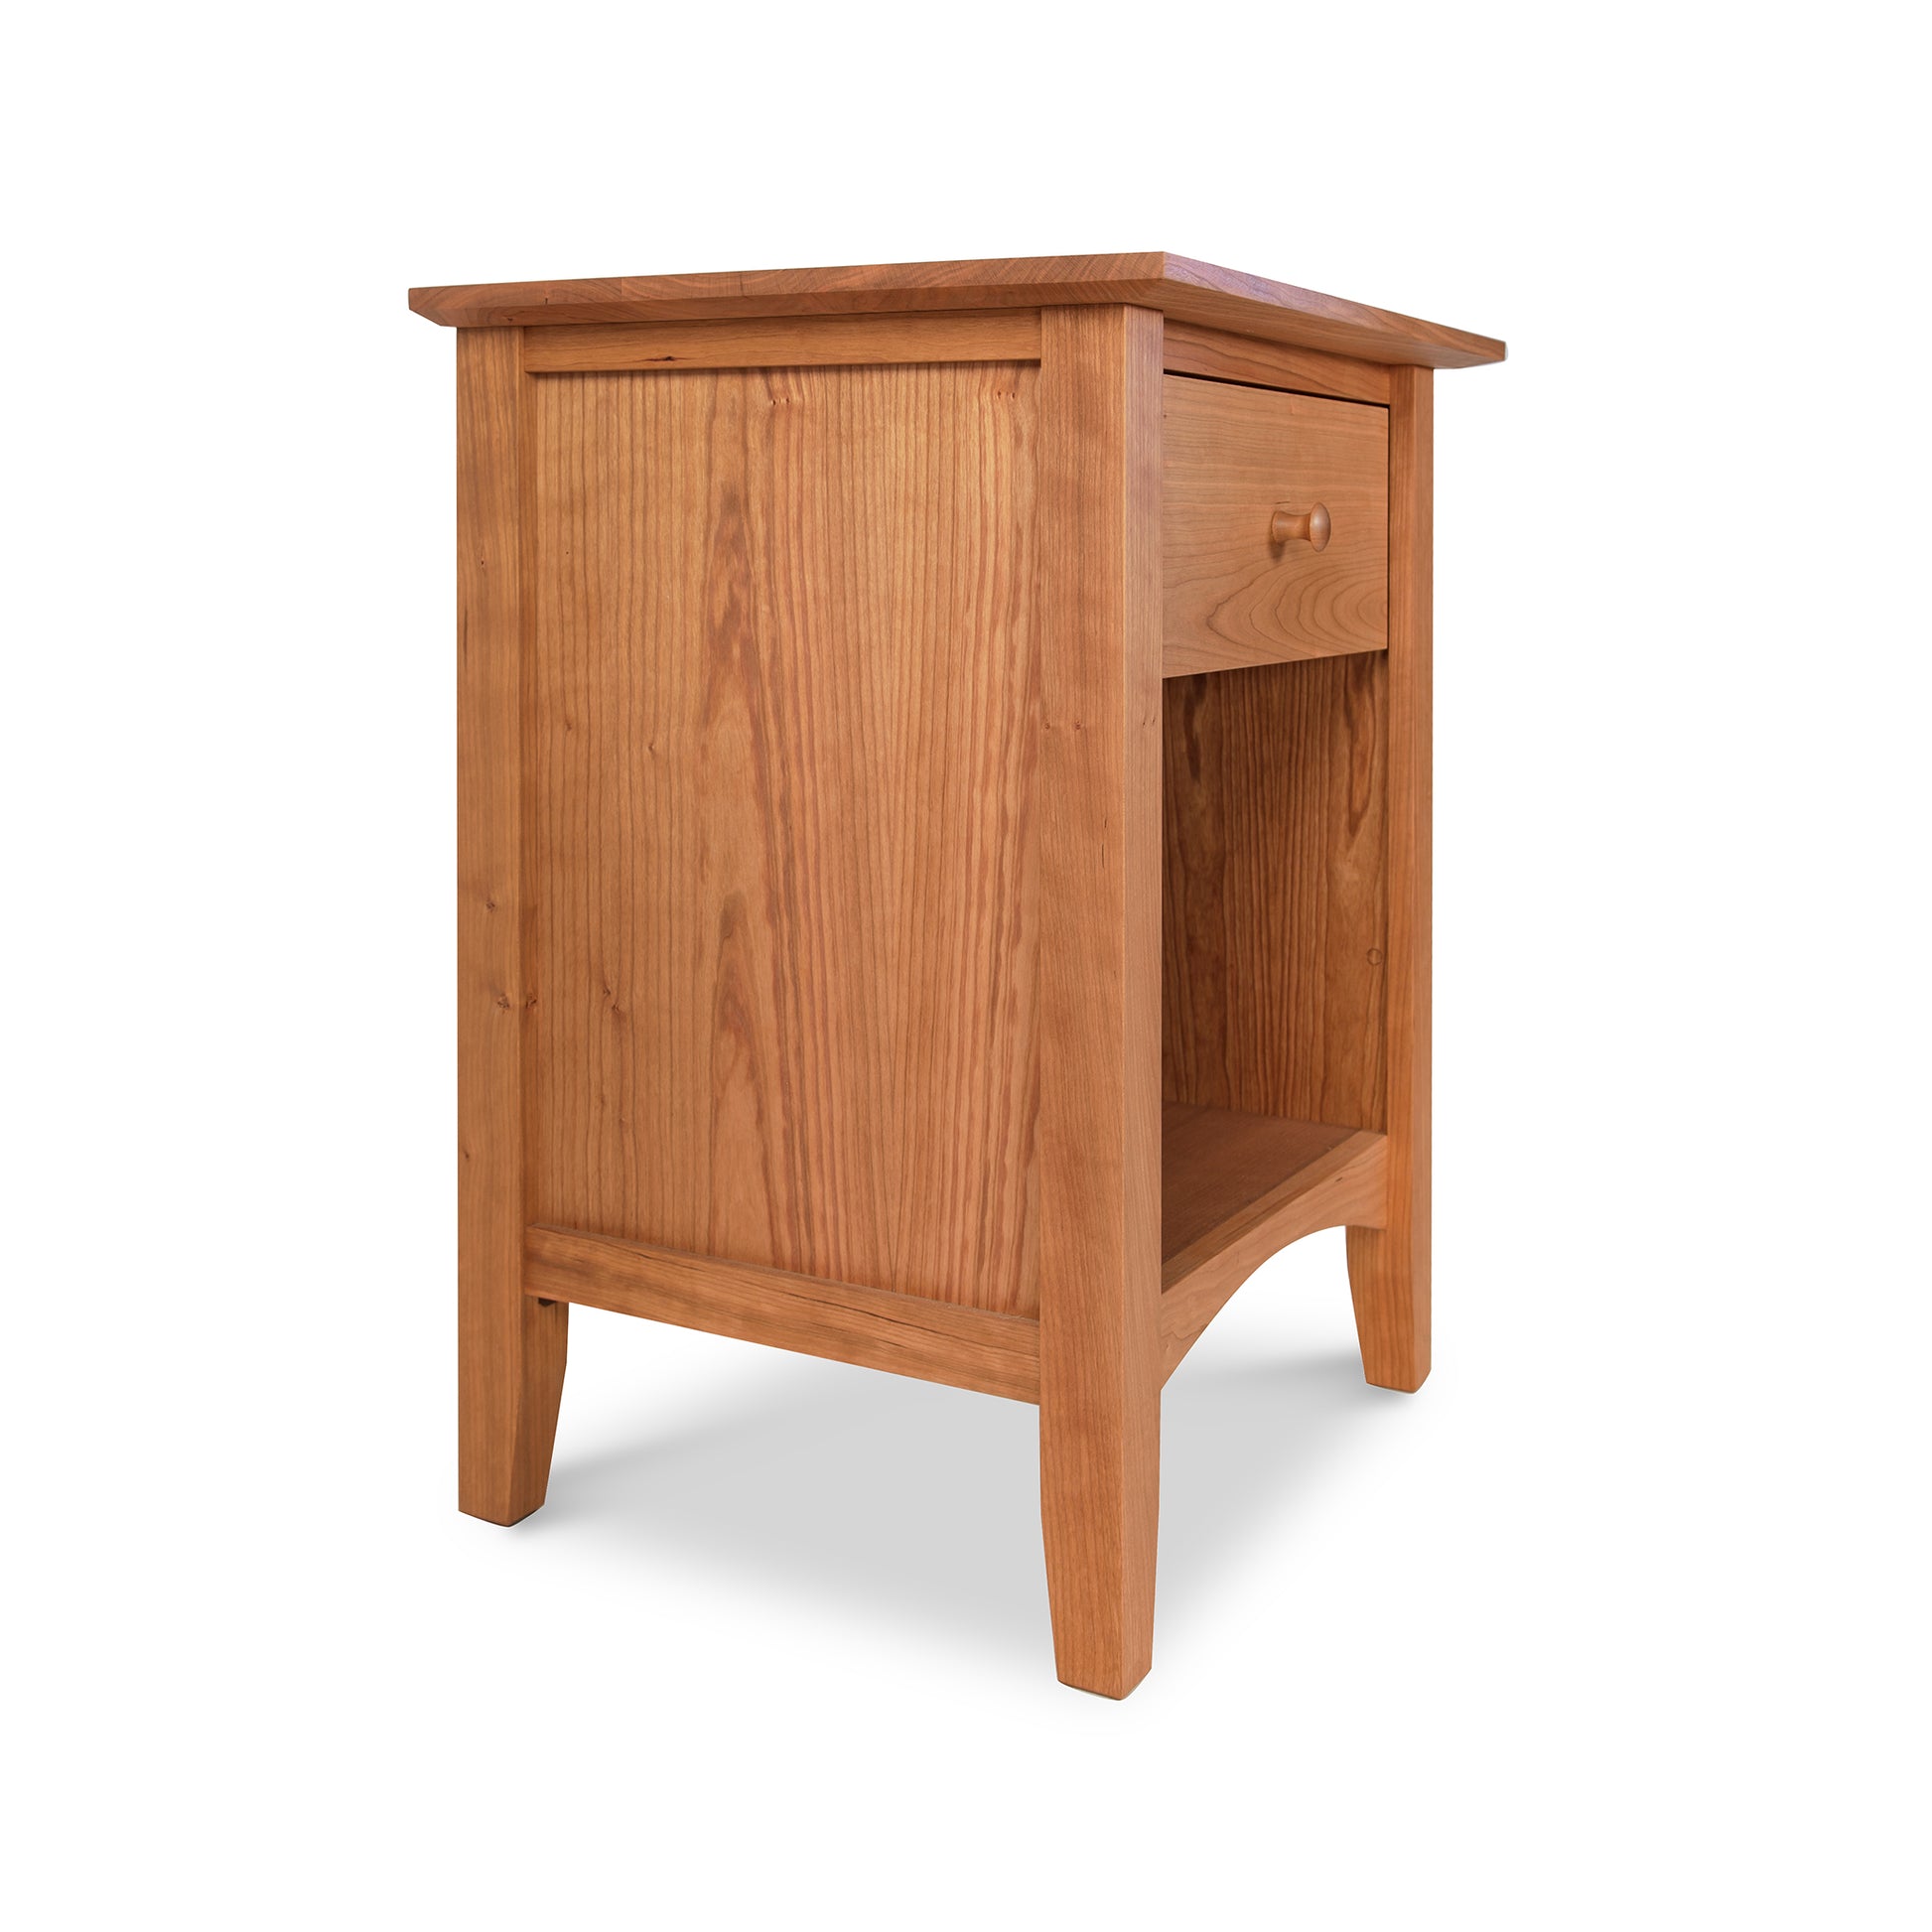 A Maple Corner Woodworks American Shaker 1-Drawer Enclosed Shelf Nightstand made from natural cherry with a smooth finish, featuring a single drawer and an open shelf below, isolated against a white background.